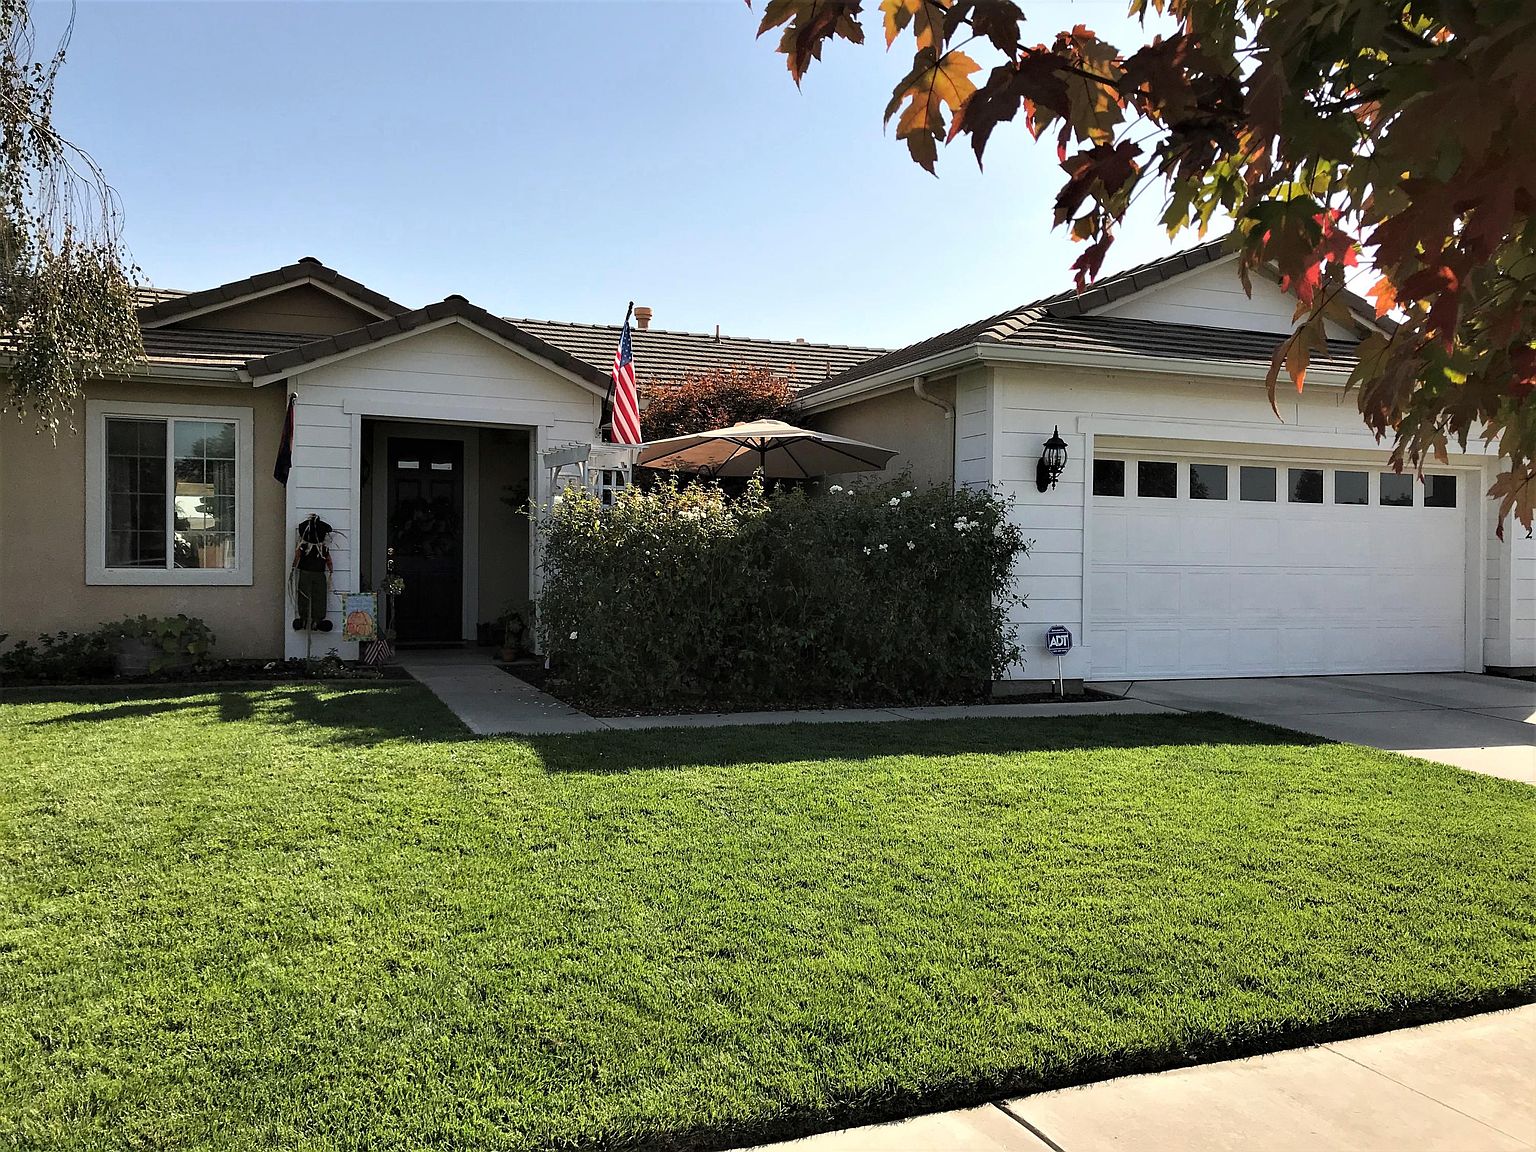 2025 Muscat Ave Tulare Ca 93274 Zillow